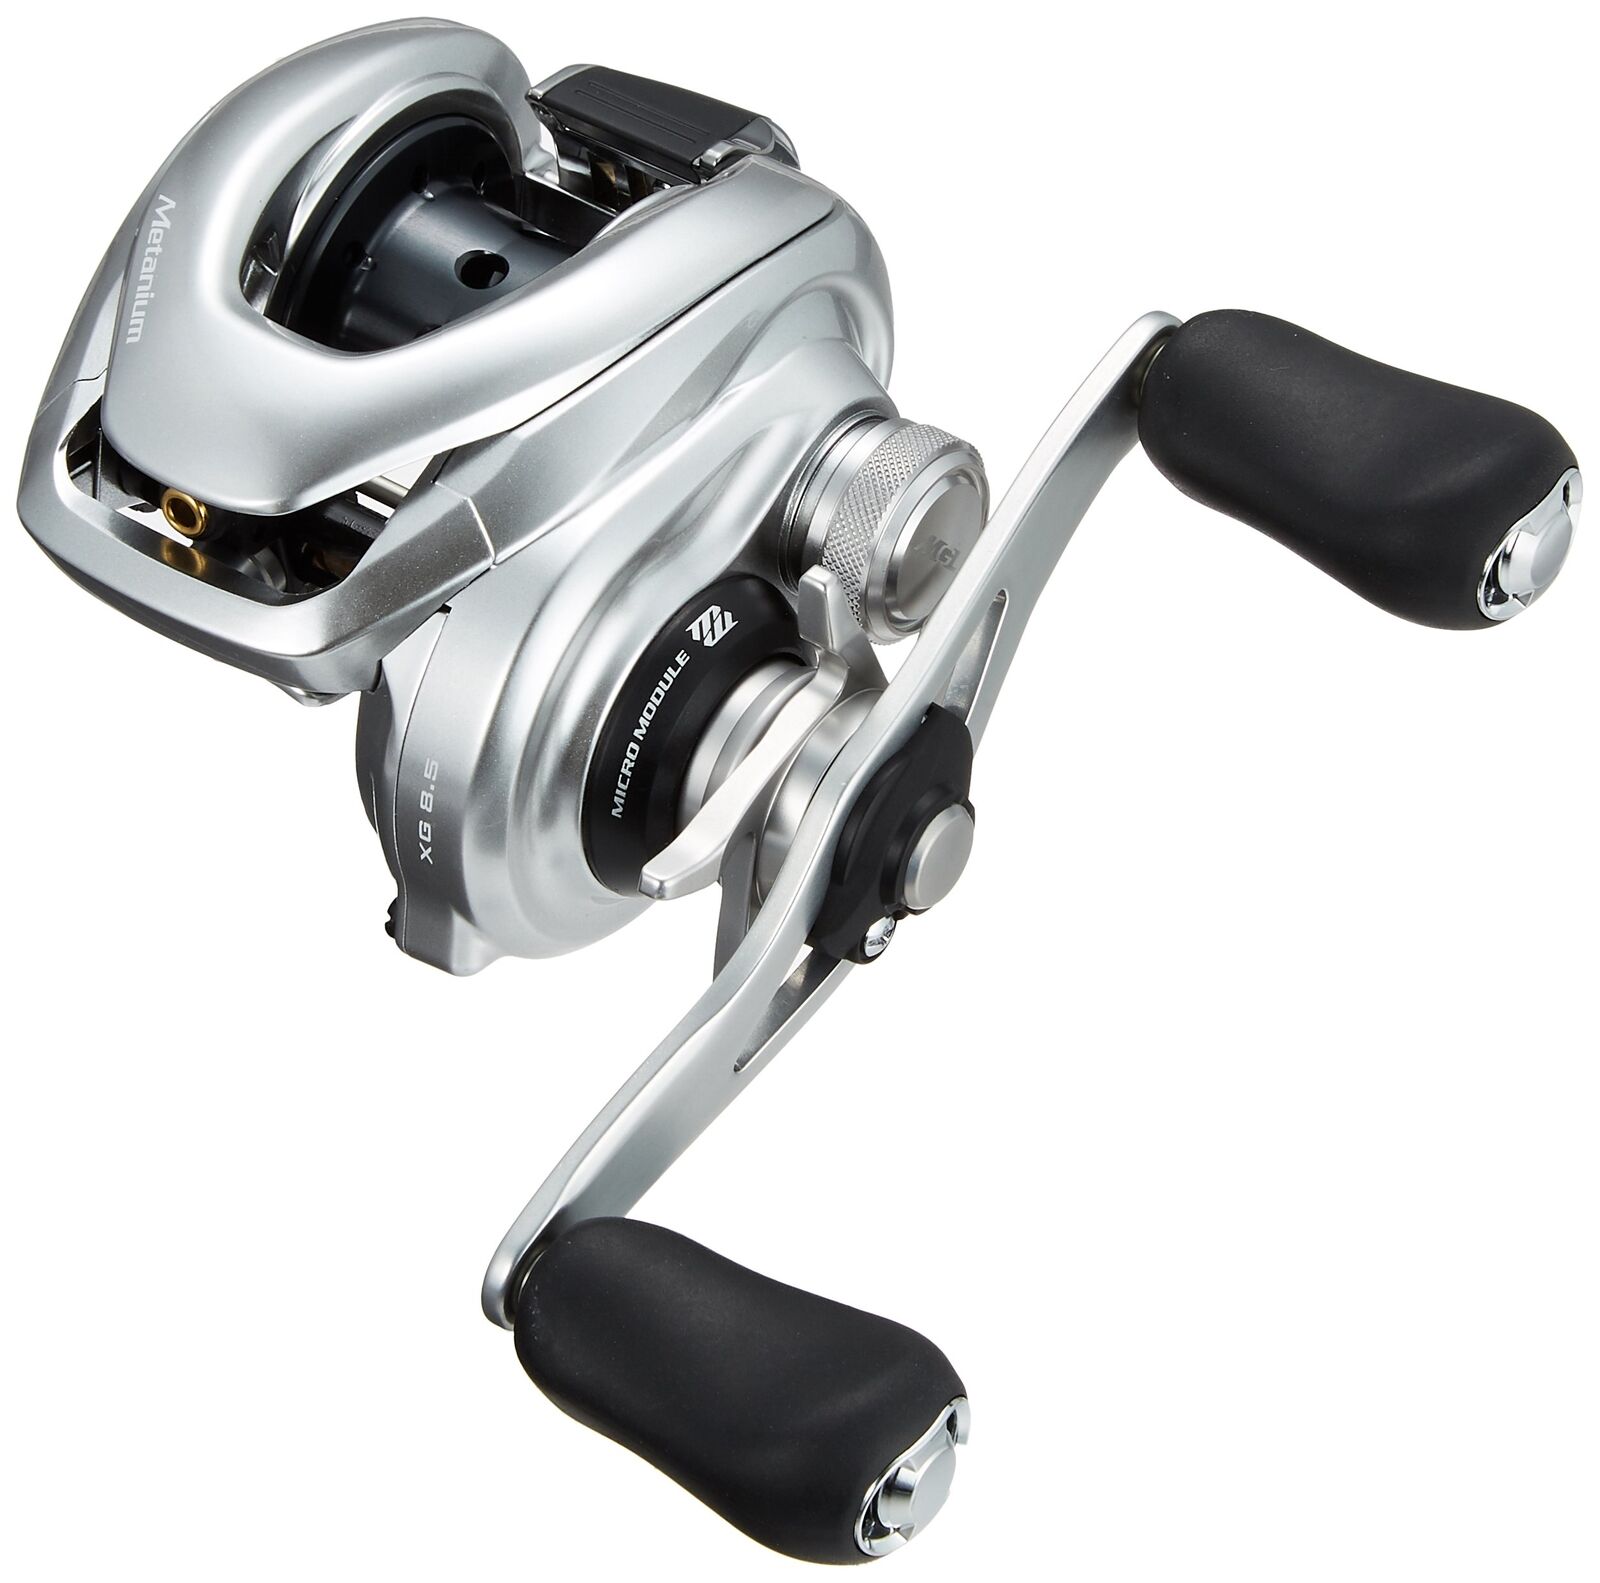 Shimano Metanium Mg7 Left Hand Bait Casting Reel Excellent+++ From JAPAN  #1598 